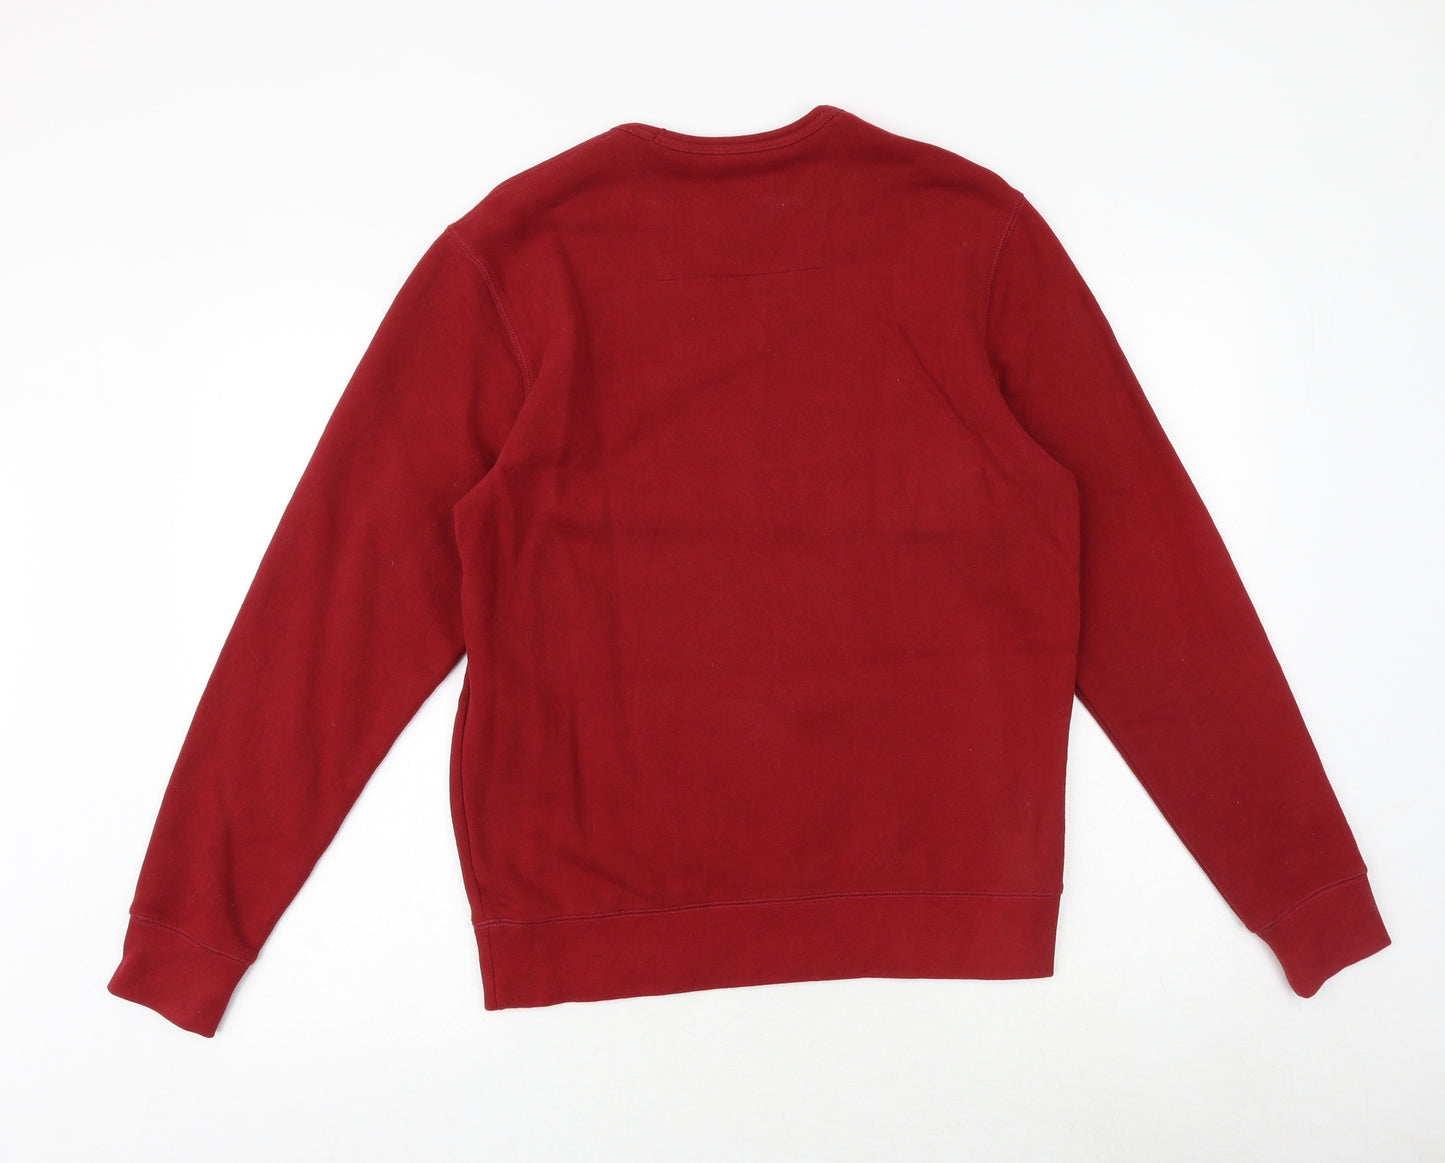 Lands' End Mens Red Cotton Pullover Sweatshirt Size S